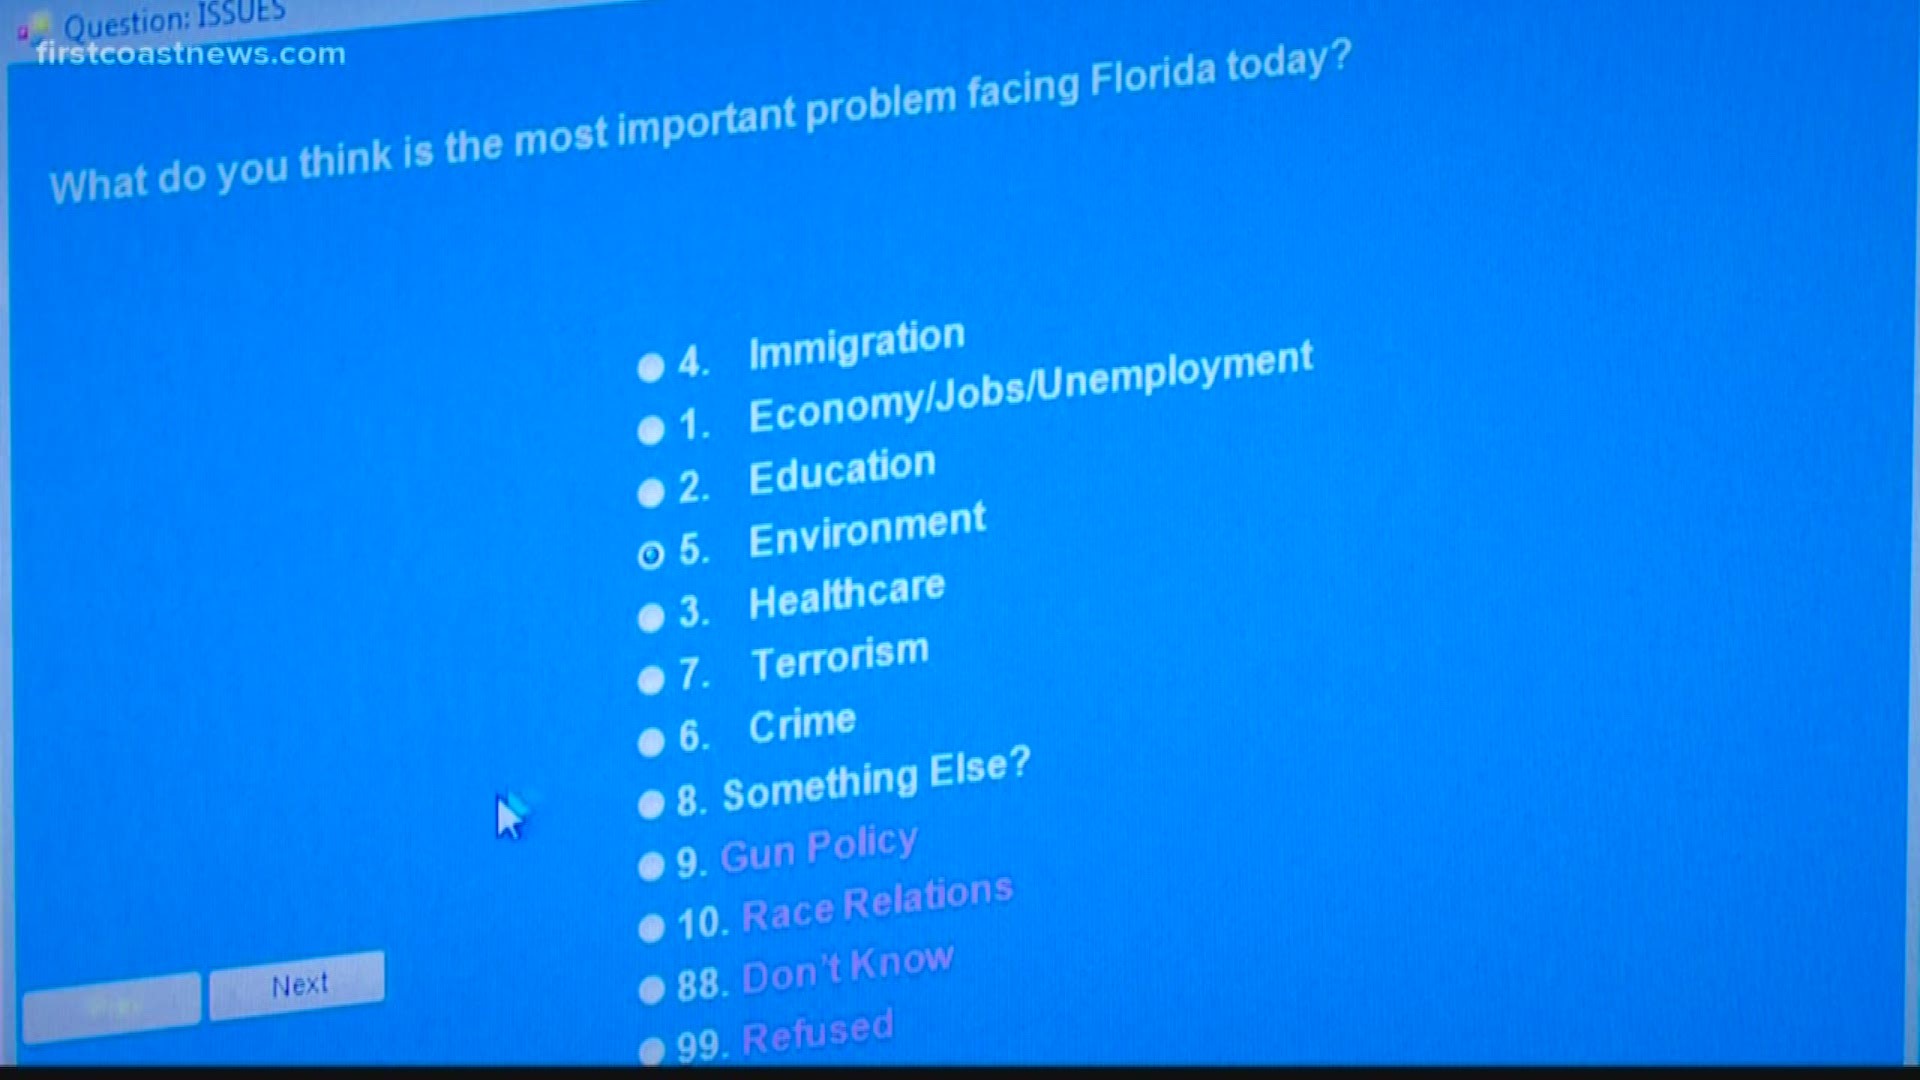 In order to get a sample of 700 likely voters, UNF's Public Opinion Research Lab will call thousands statewide.